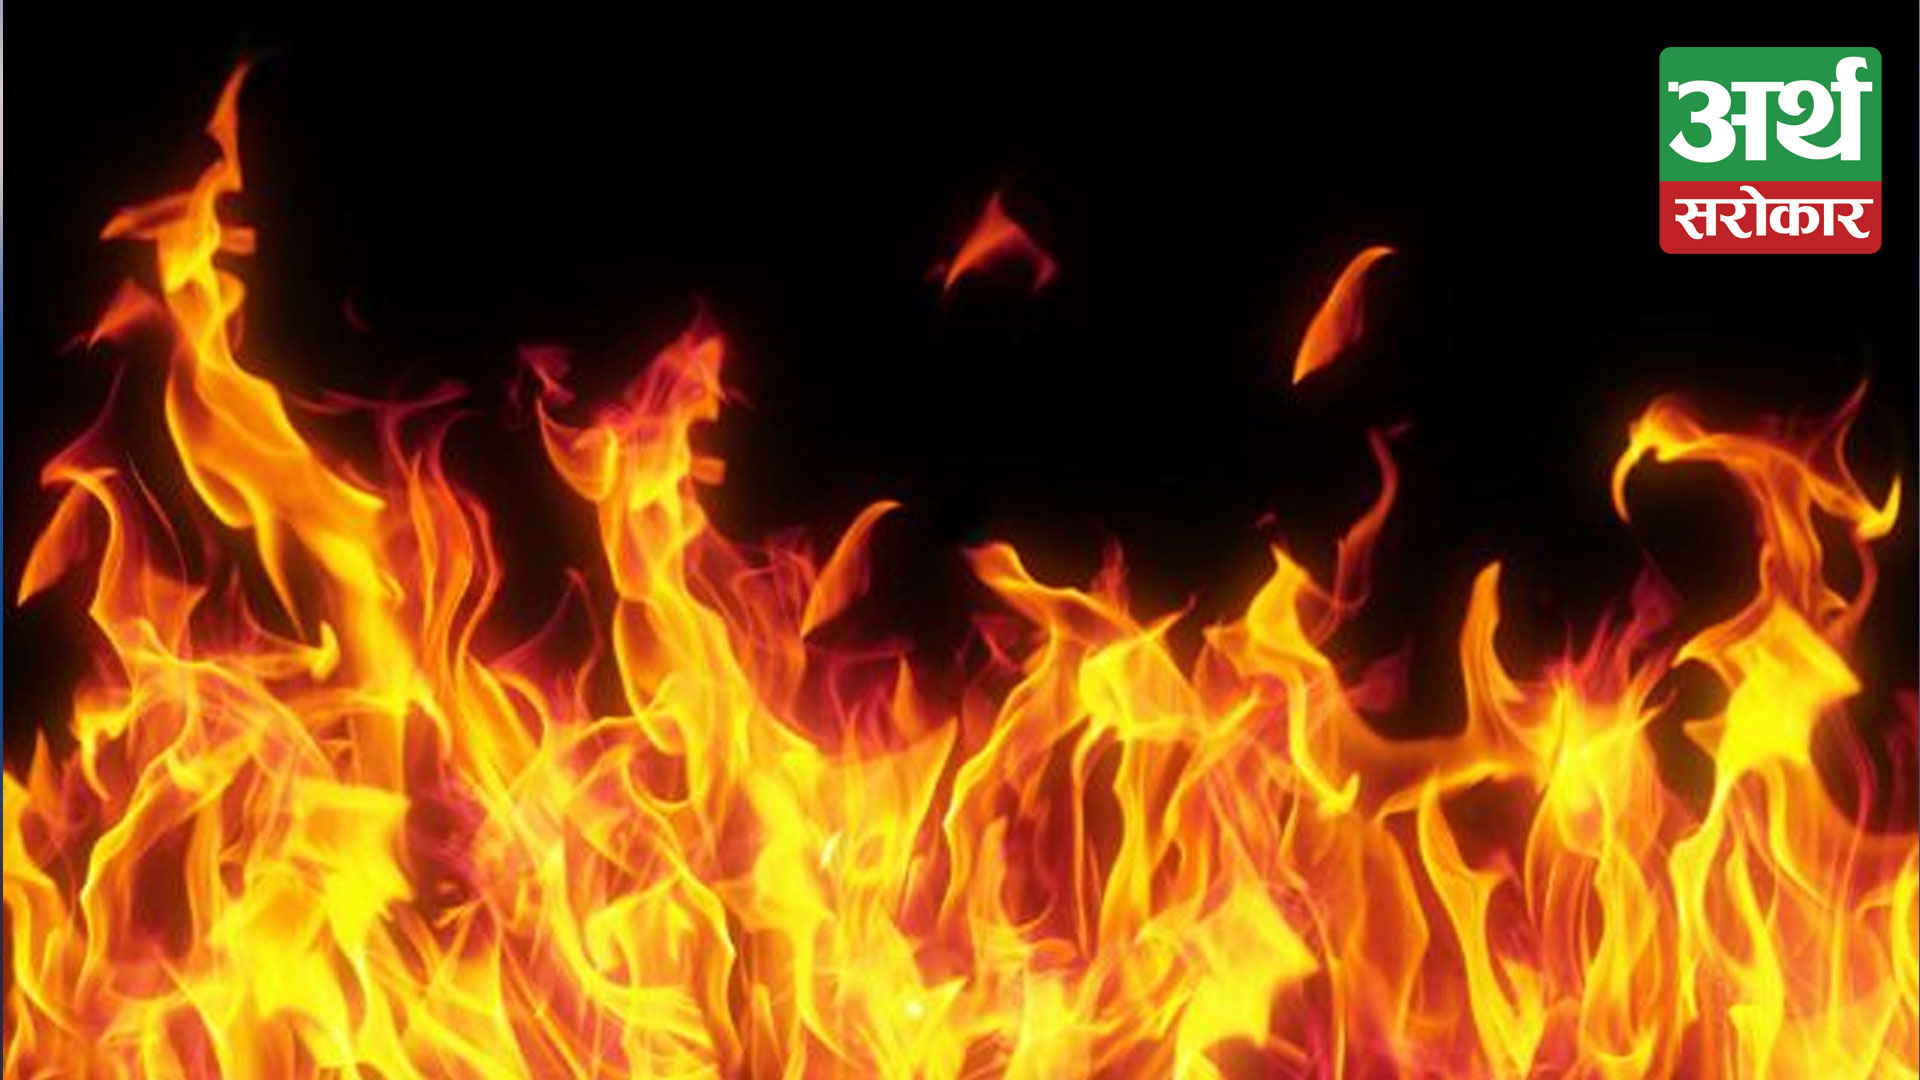 Property worth Rs 20 million gutted by fire at two cloth stores in Golbazar